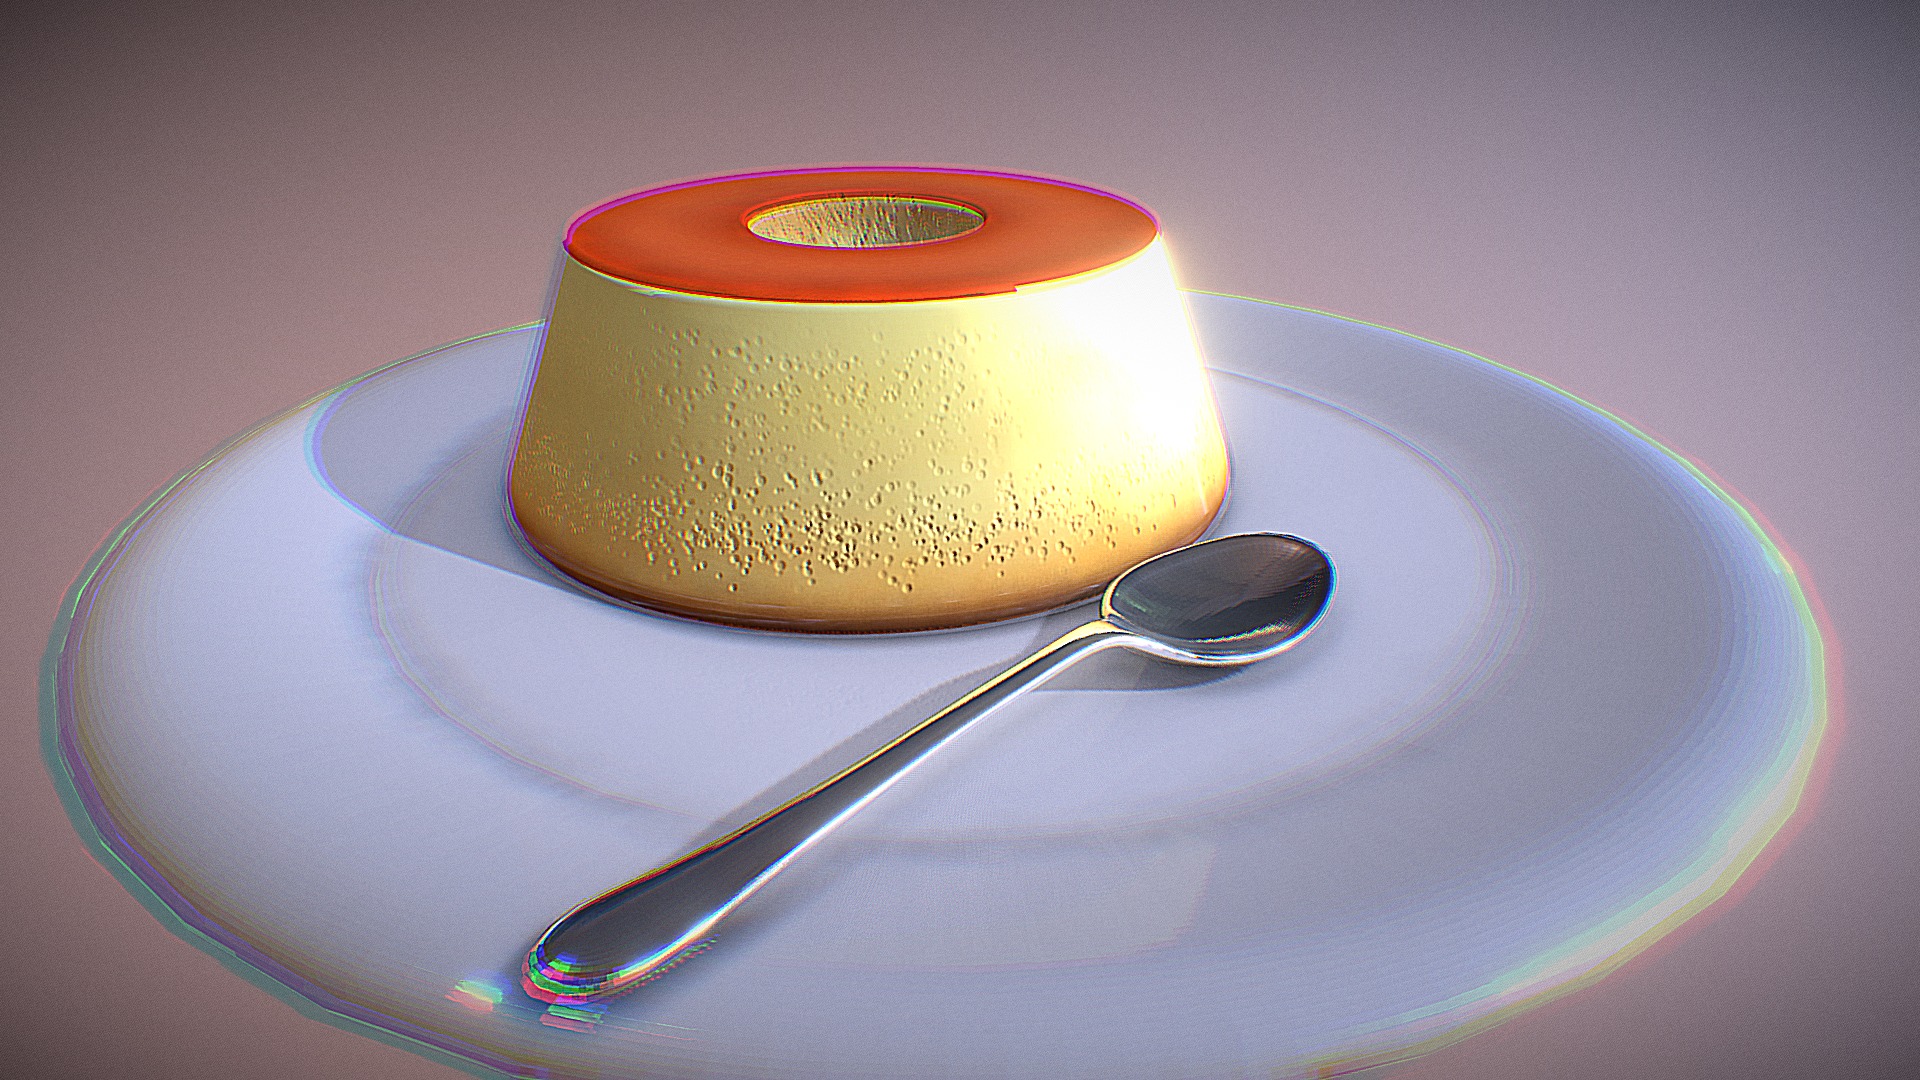 3D model Mini Flan (Mini pudim) - This is a 3D model of the Mini Flan (Mini pudim). The 3D model is about a bowl with a spoon in it.